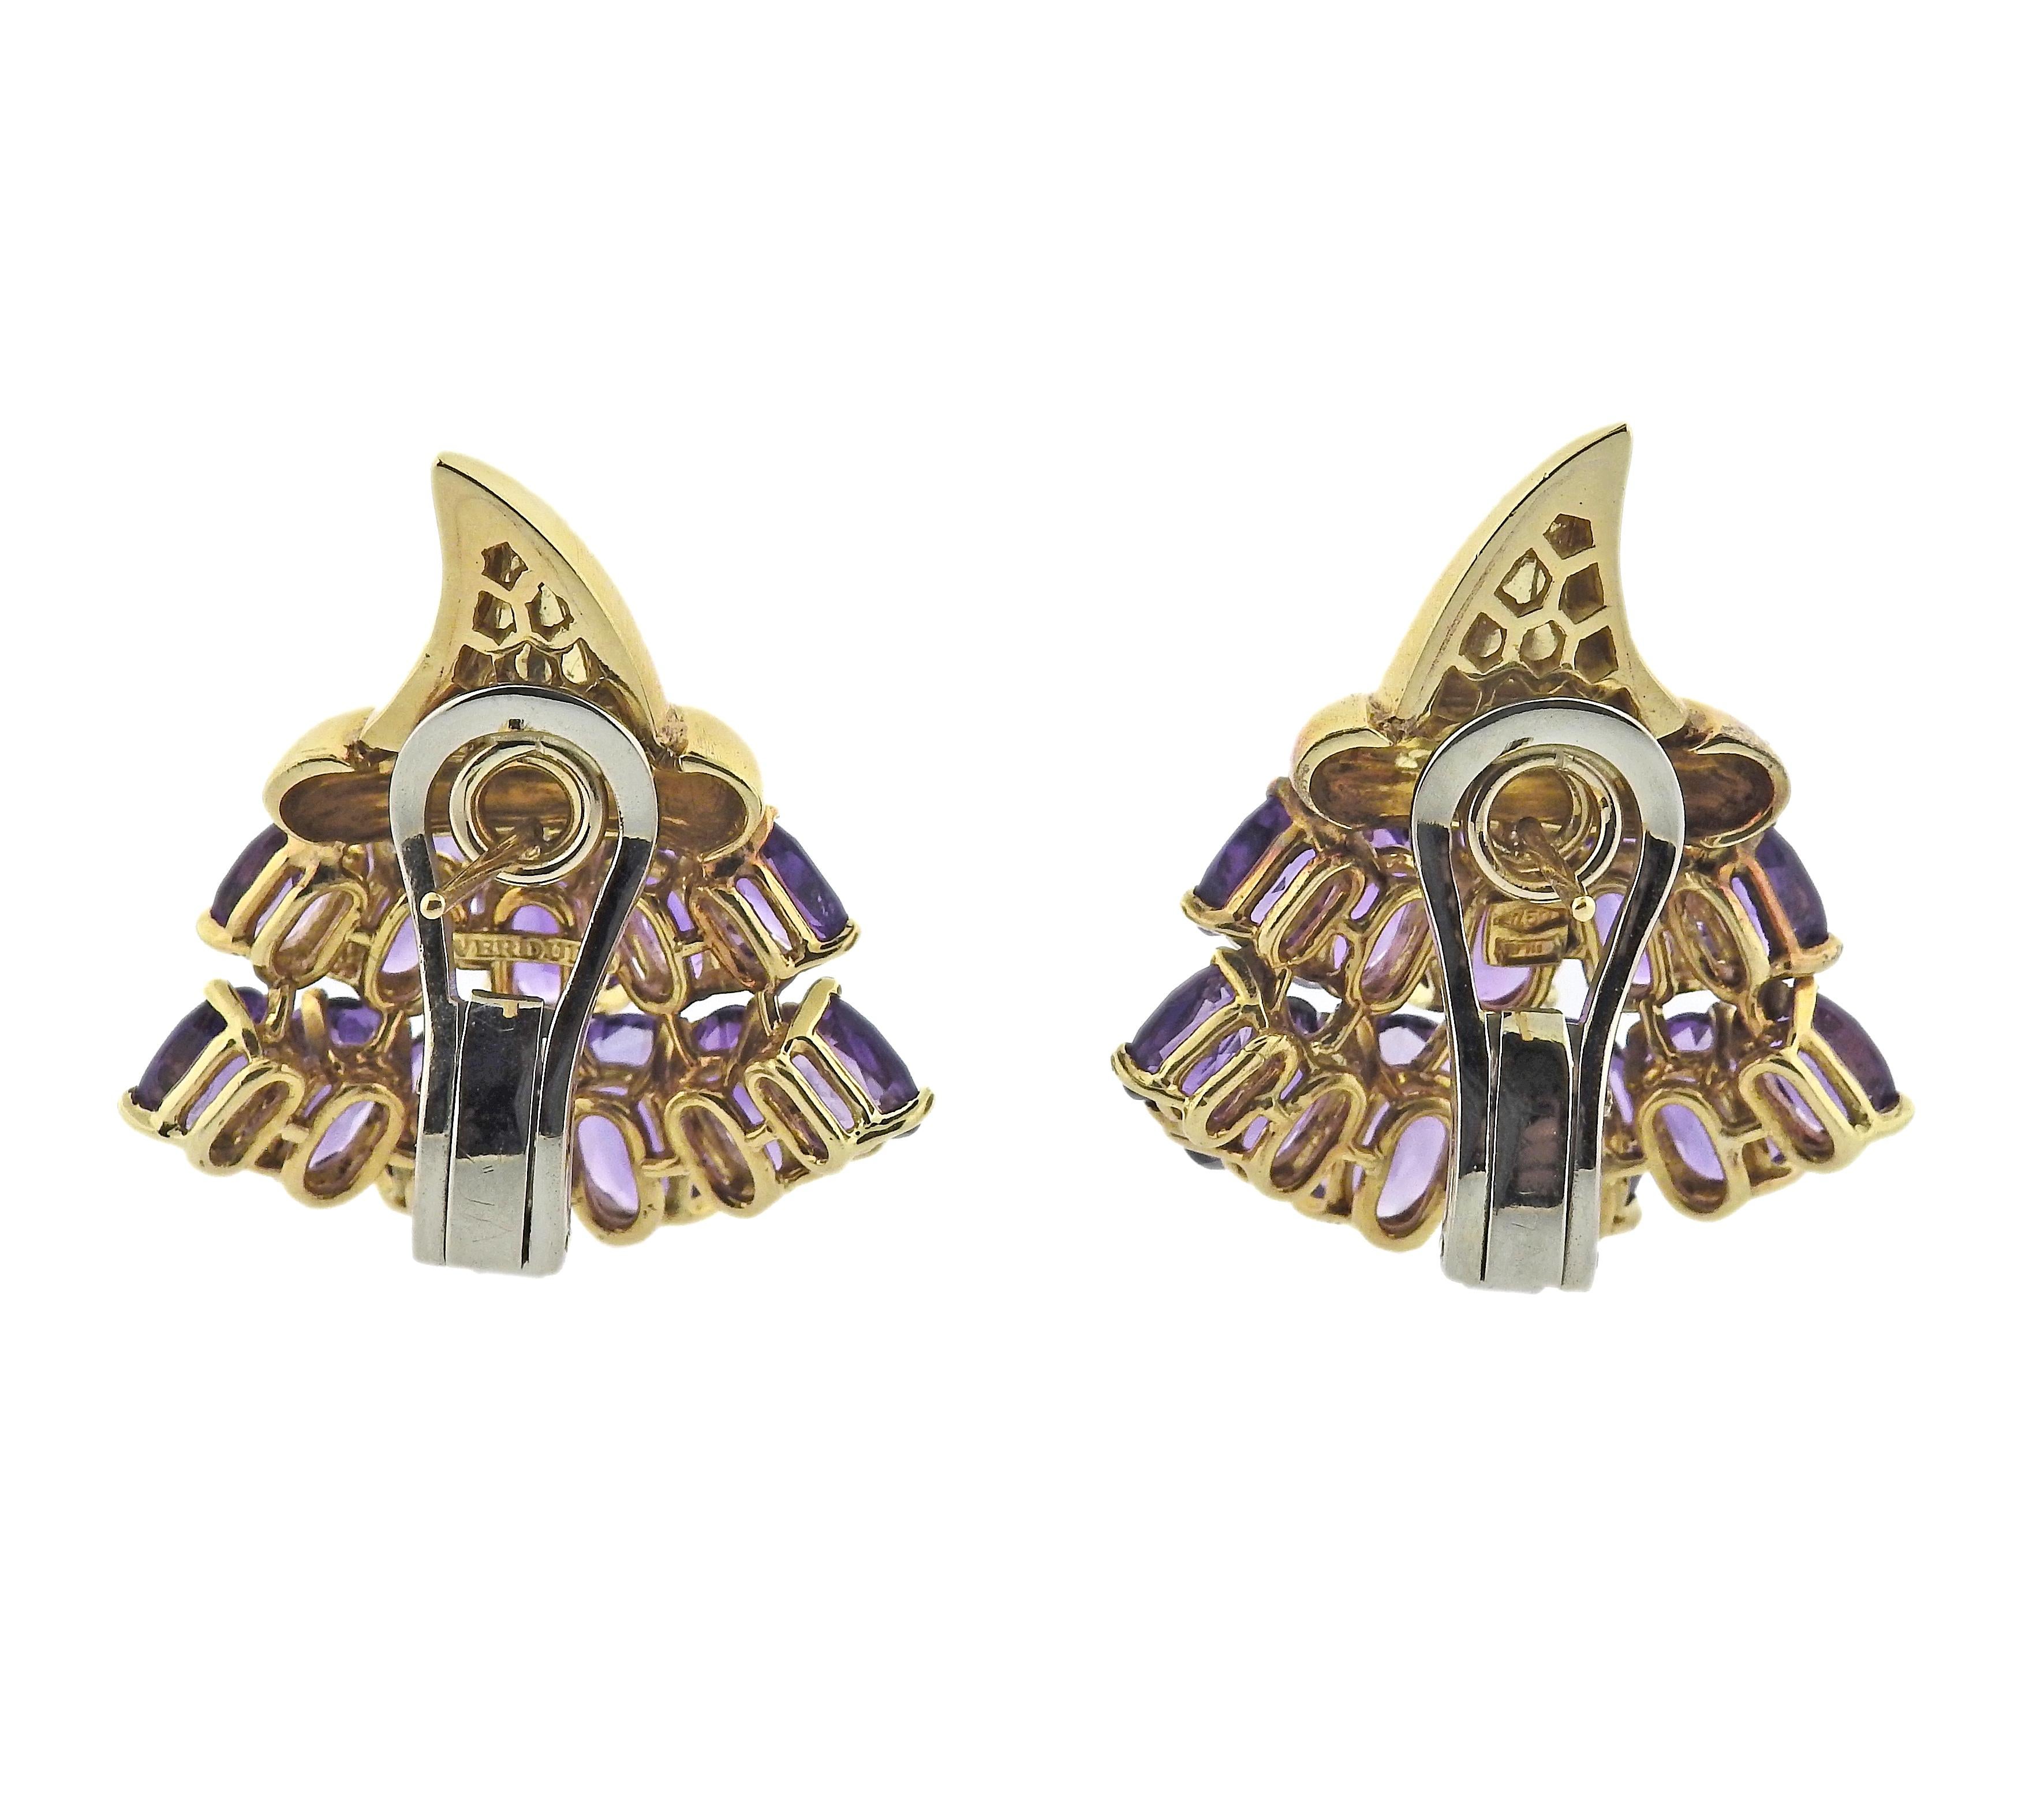 Pair of 18k gold Verdura Cornucopia earrings with amethyst. Come with box. Earrings are 30mm x 28mm. Marked: 750, Italian maker's mark (514 NA). Weight - 24.6 grams. 